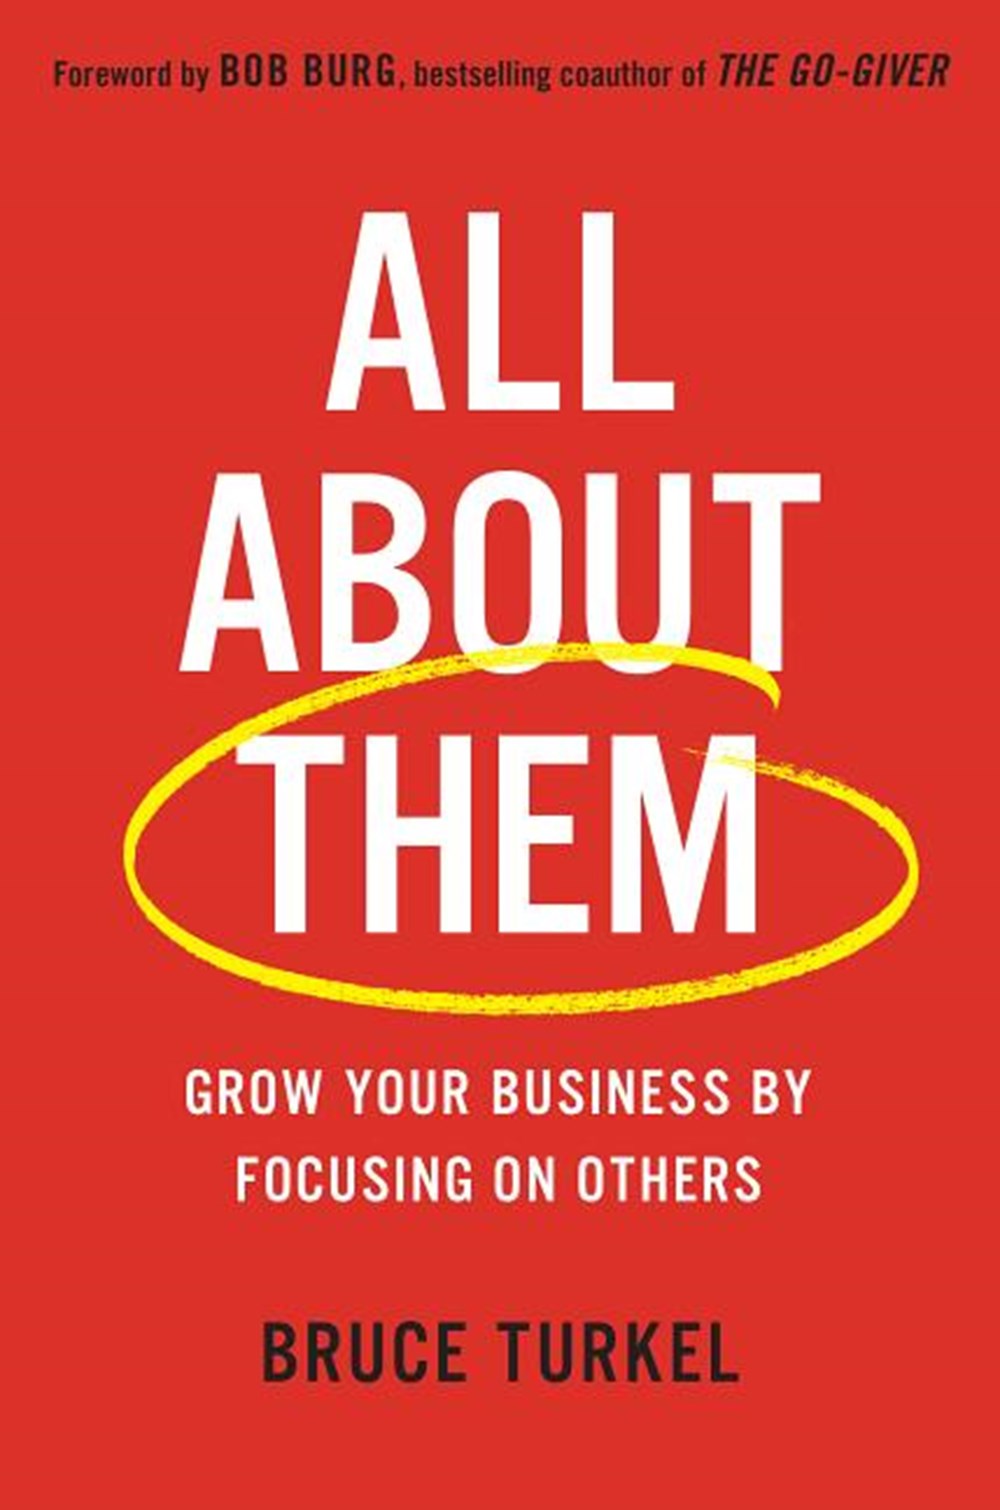 All about Them: Grow Your Business by Focusing on Others